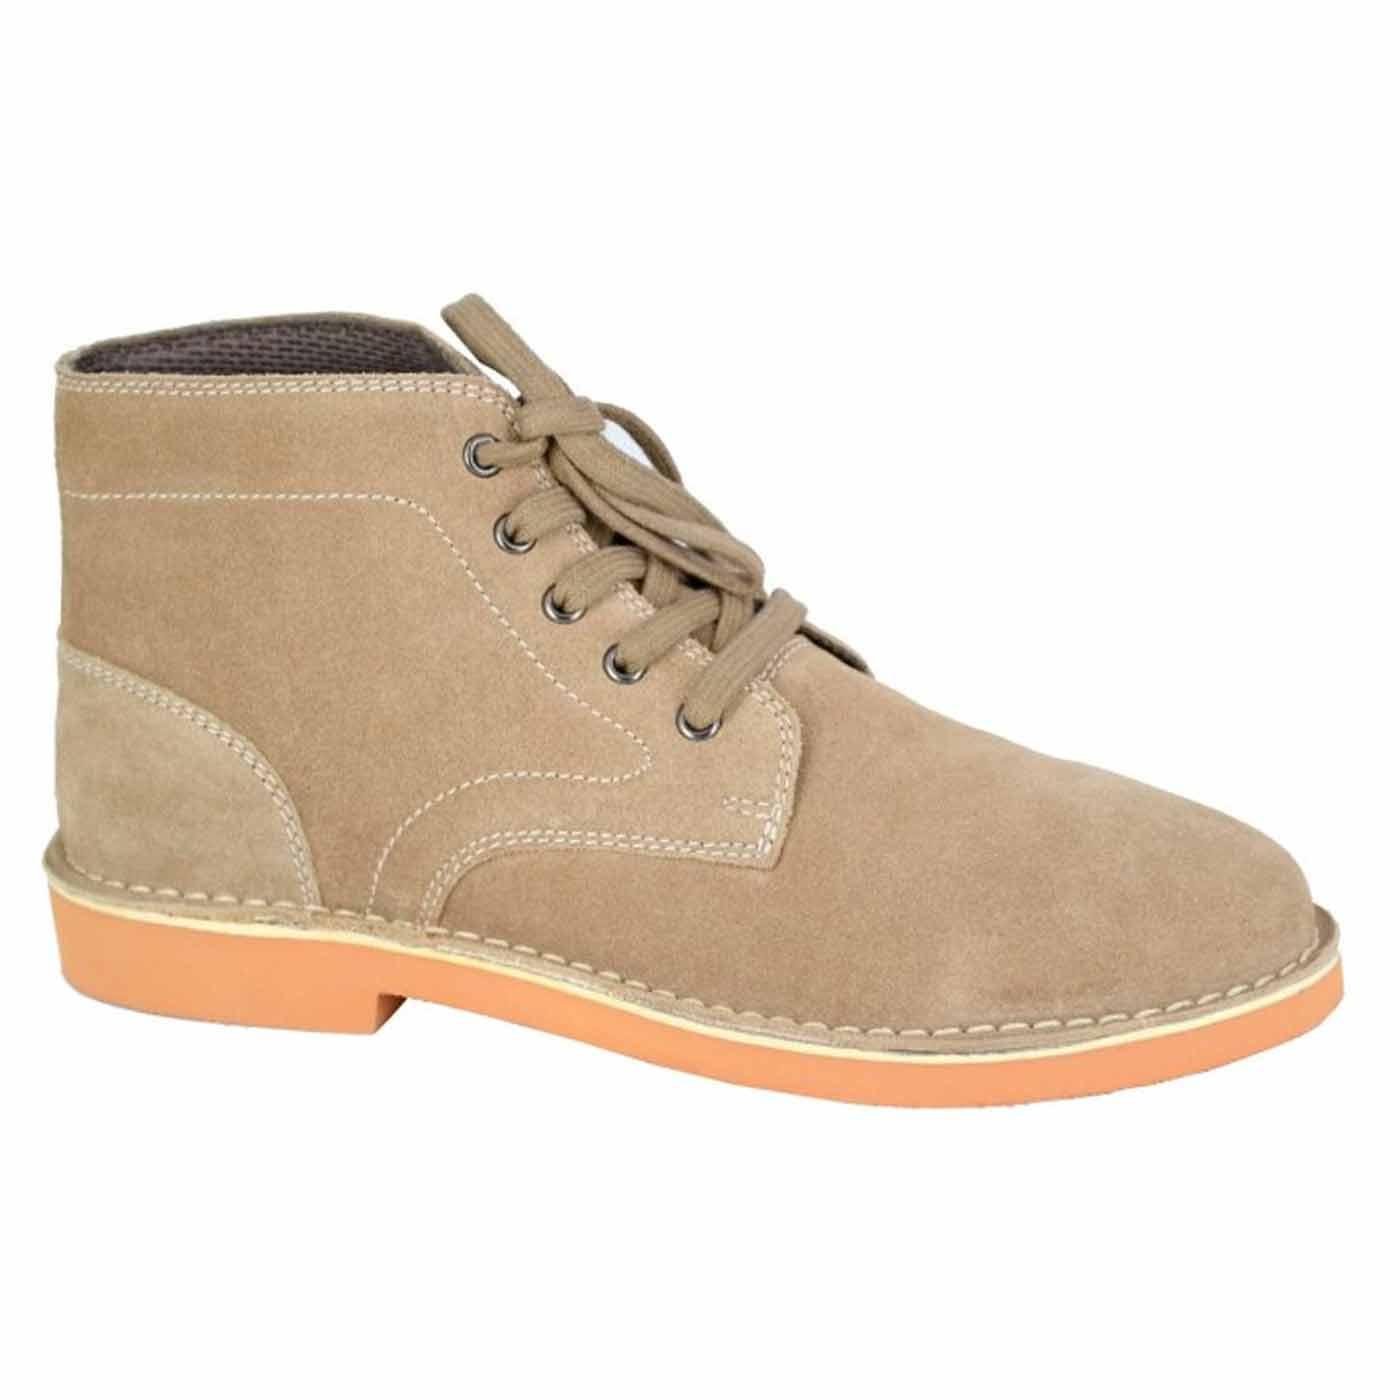 Roamers Retro 5 Eye Suede Leisure Boots Taupe